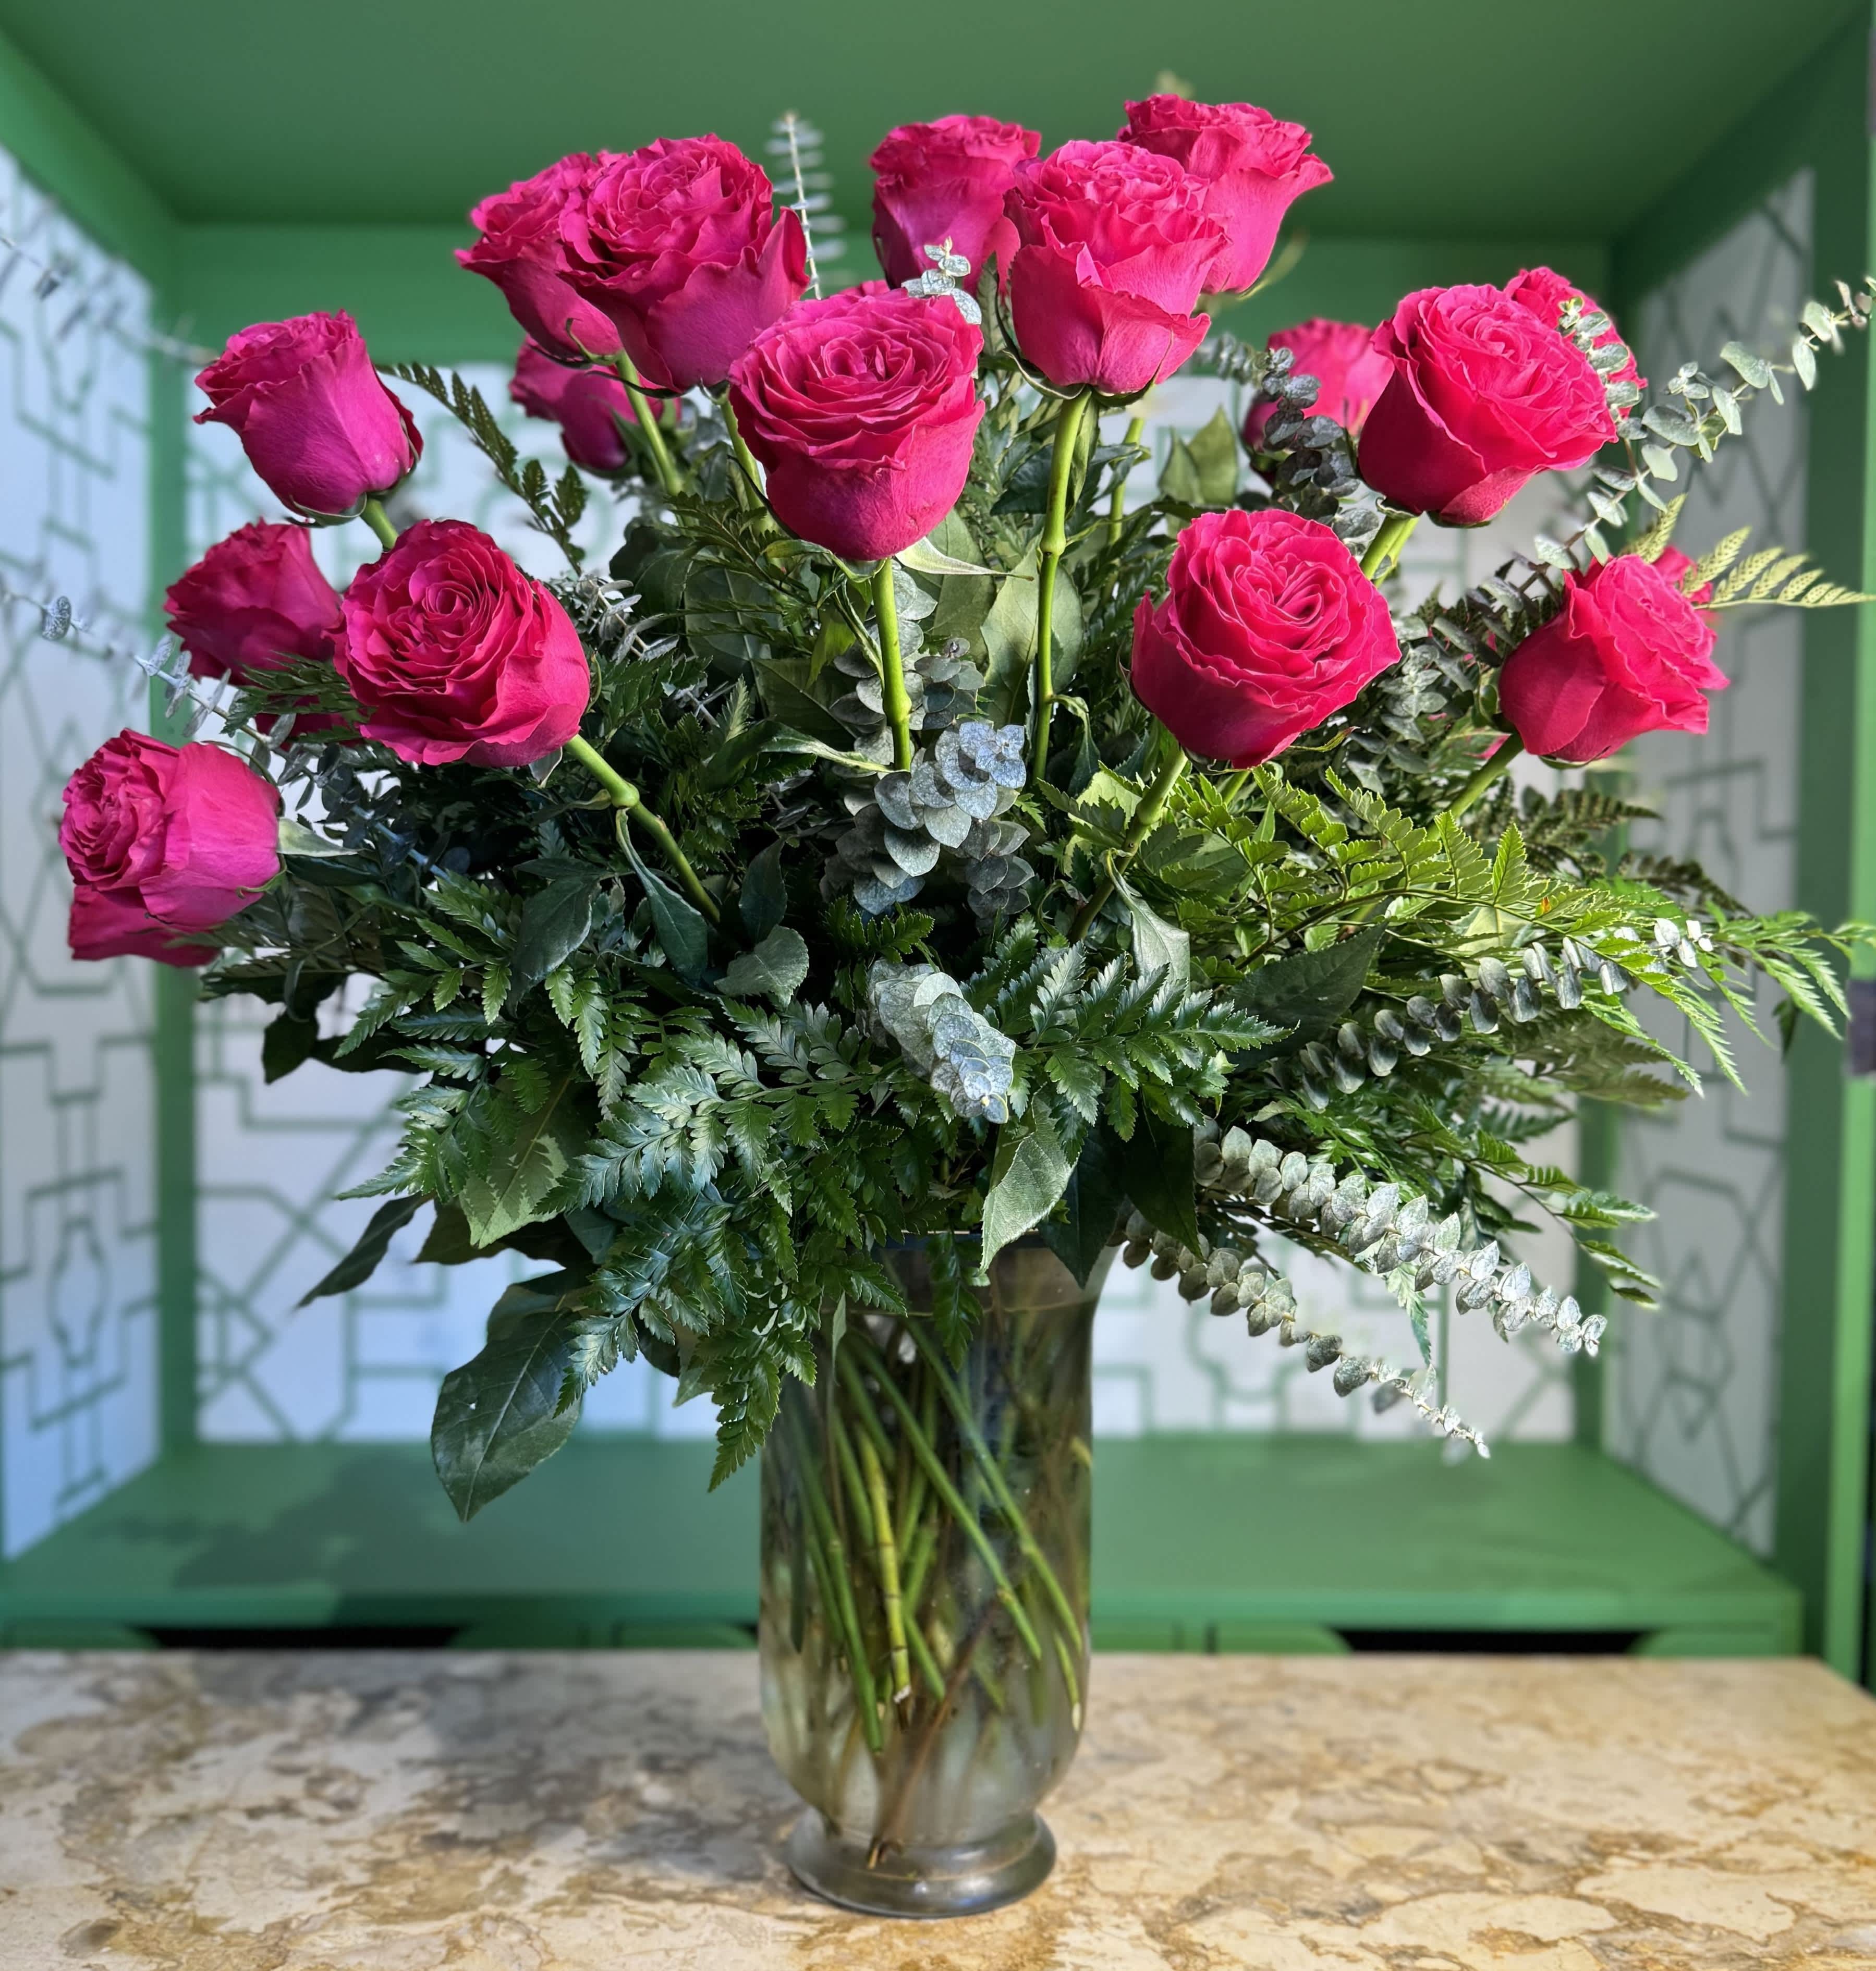 Two Dozen Hot Pink Roses  - This arrangement is the perfect &quot;pick me up&quot; to brighten someone's day.  Two Dozen Long Stemmed Hot Pink roses are the perfect gift for Valentine's Day, birthday, just because, and a thank you.    At Belden's Florist we stand behind the quality of our products. We guarantee that our flowers will remain fresh and beautiful for 3-5 days after delivery. As cut flowers, they may naturally start to wilt beyond this timeframe. However, we ensure that you receive the freshest blooms possible, carefully selected and expertly arranged to bring joy and elegance to your space. To help your flowers stay fresher longer, we recommend adding fresh water to the vase regularly. Just like you, flowers need hydration to thrive, and refreshing the water allows them to drink up and continue to dazzle you with their beauty.  *VALENTINE MACARON BOX NOT INCLUDED; THIS IS AVAILABLE TO PURCHASE AS AN ADD ON TO YOUR ORDER*